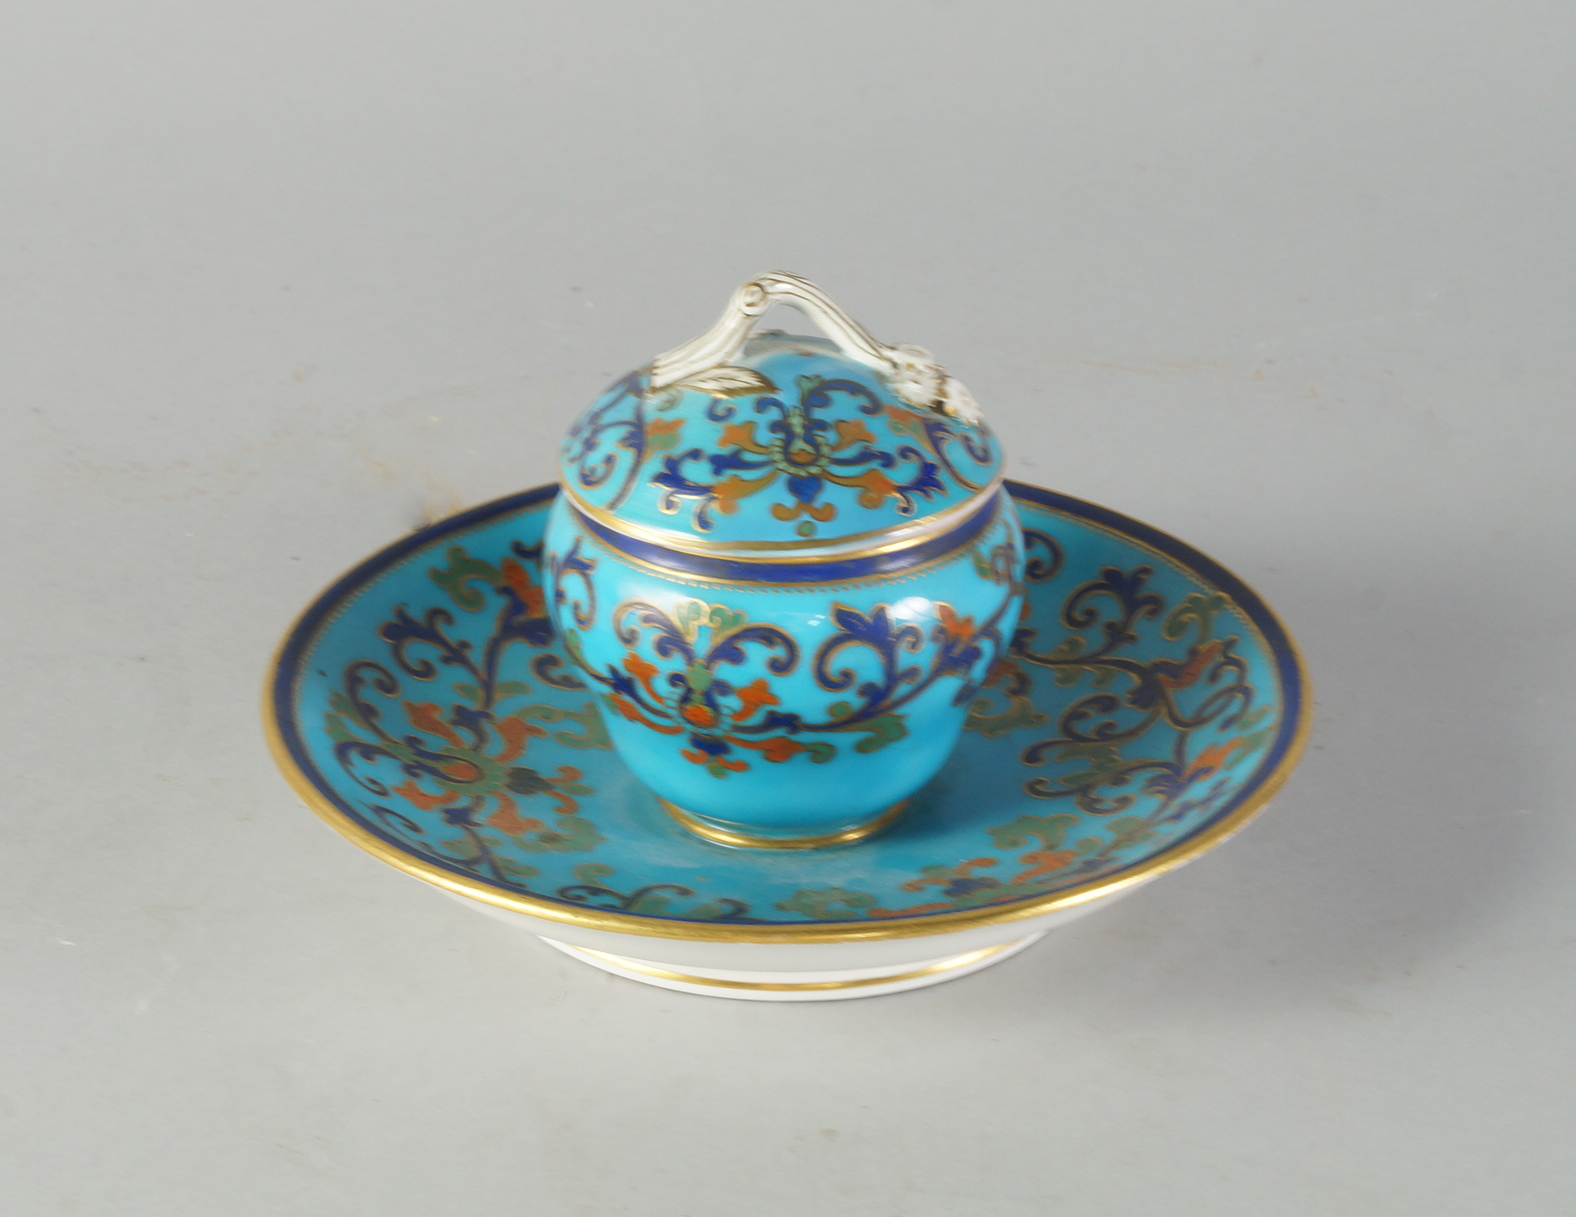 A Minton porcelain ink well, 19th century,